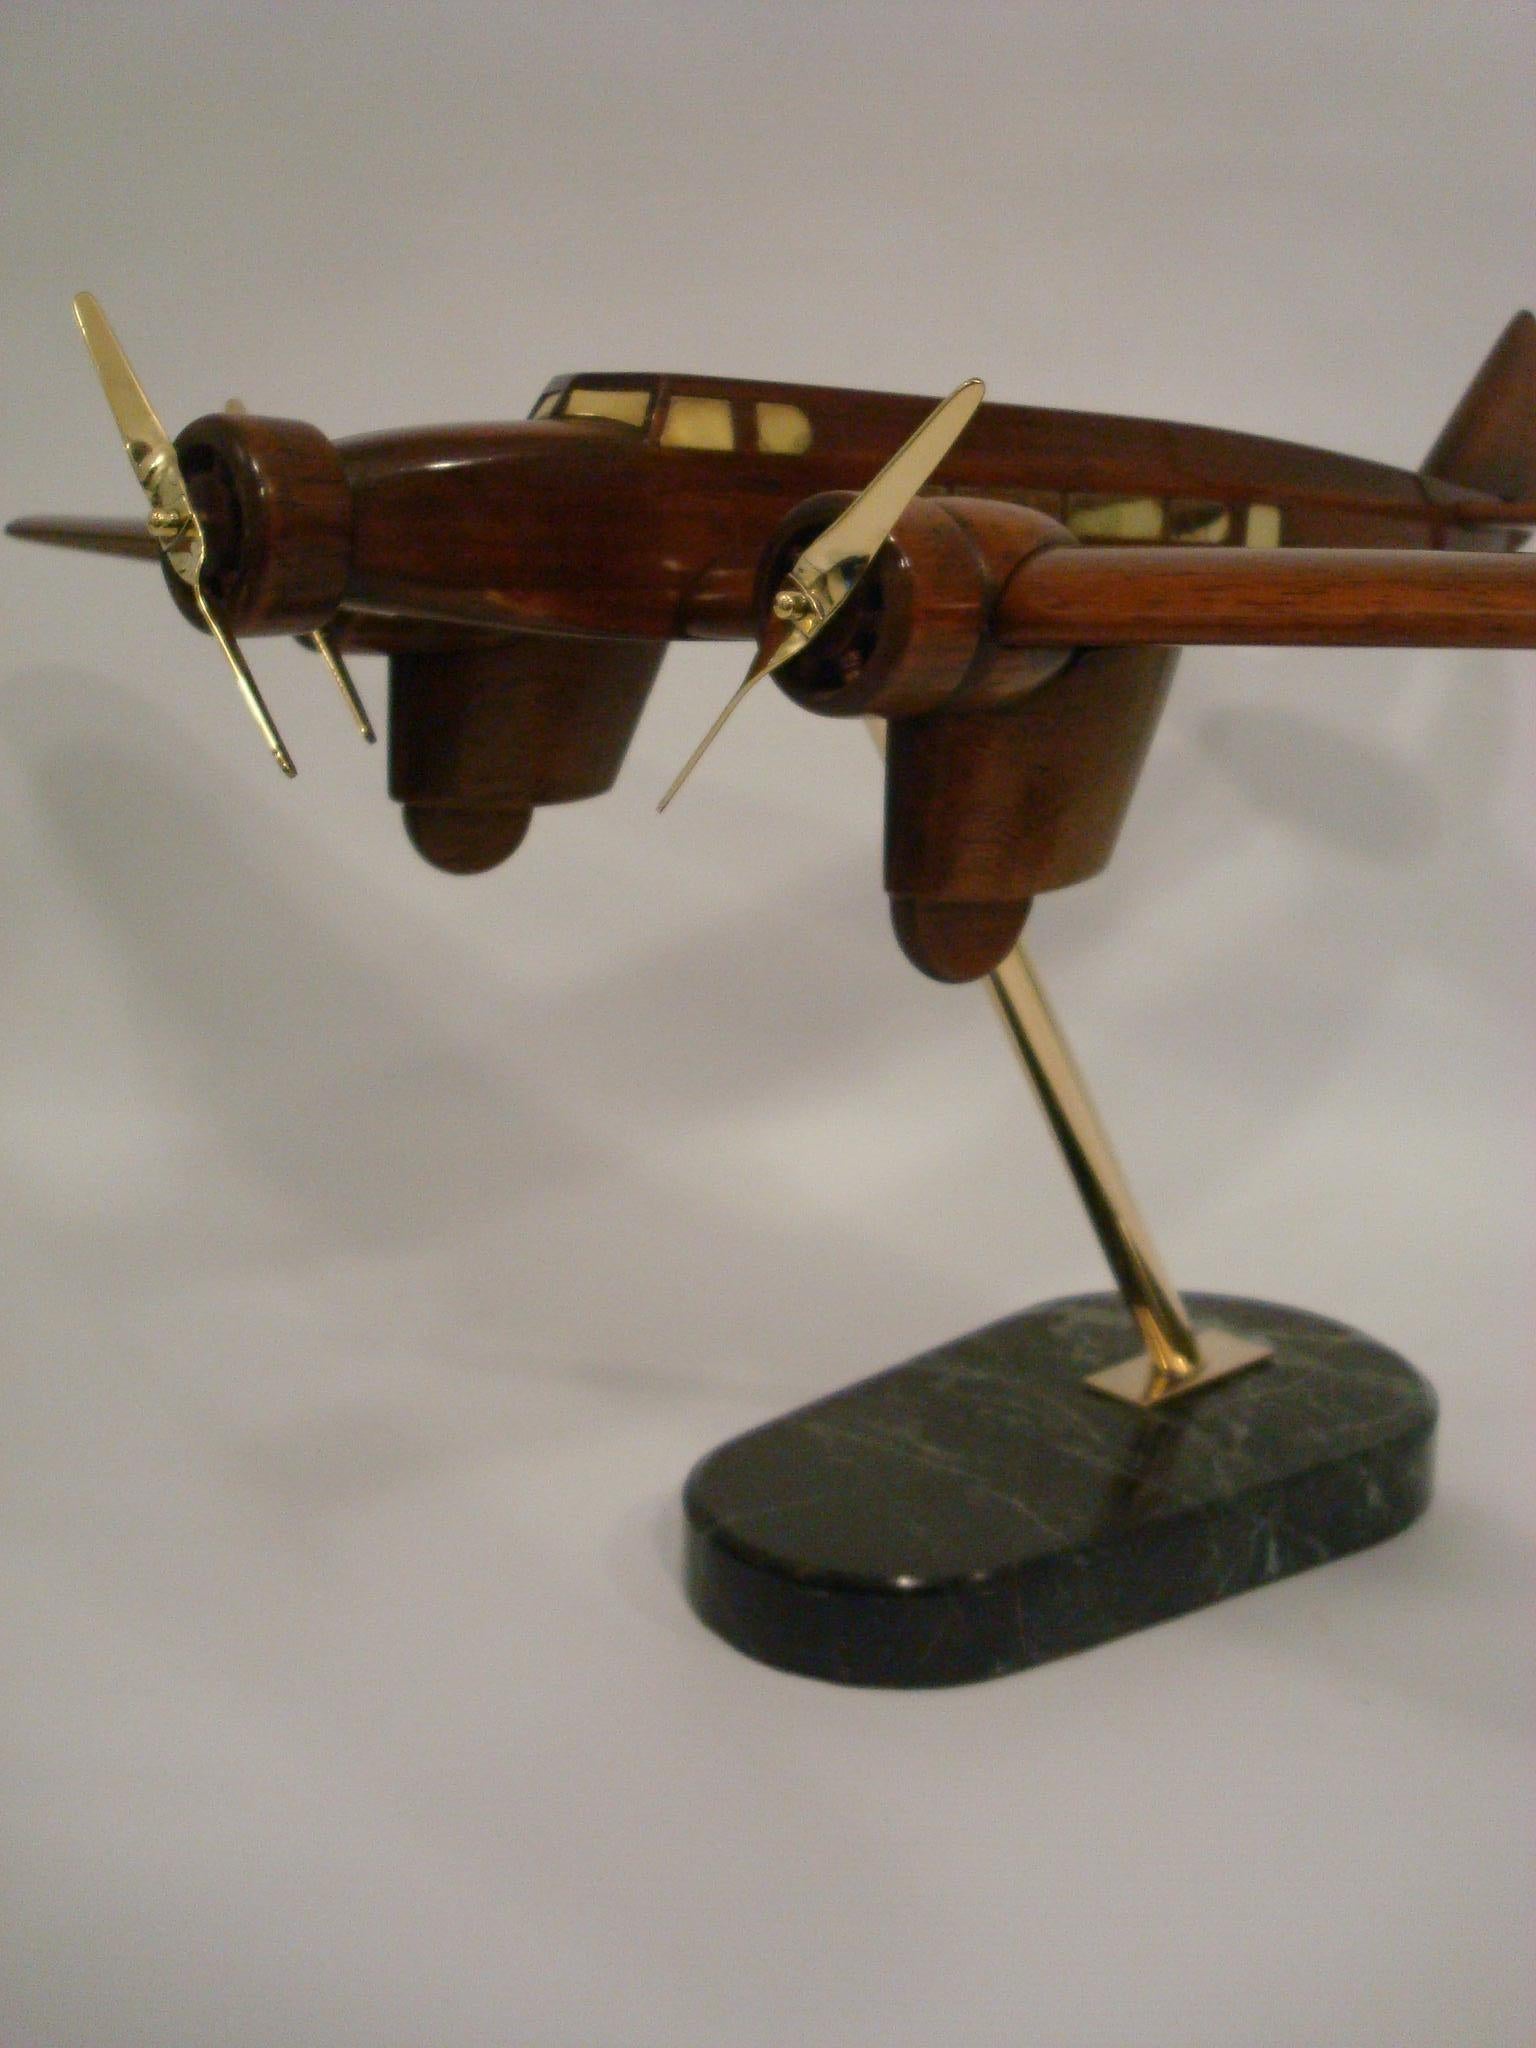 Art Deco Dewoitine Wooden Counters Desk Model Airplane 1930s French For Sale 3